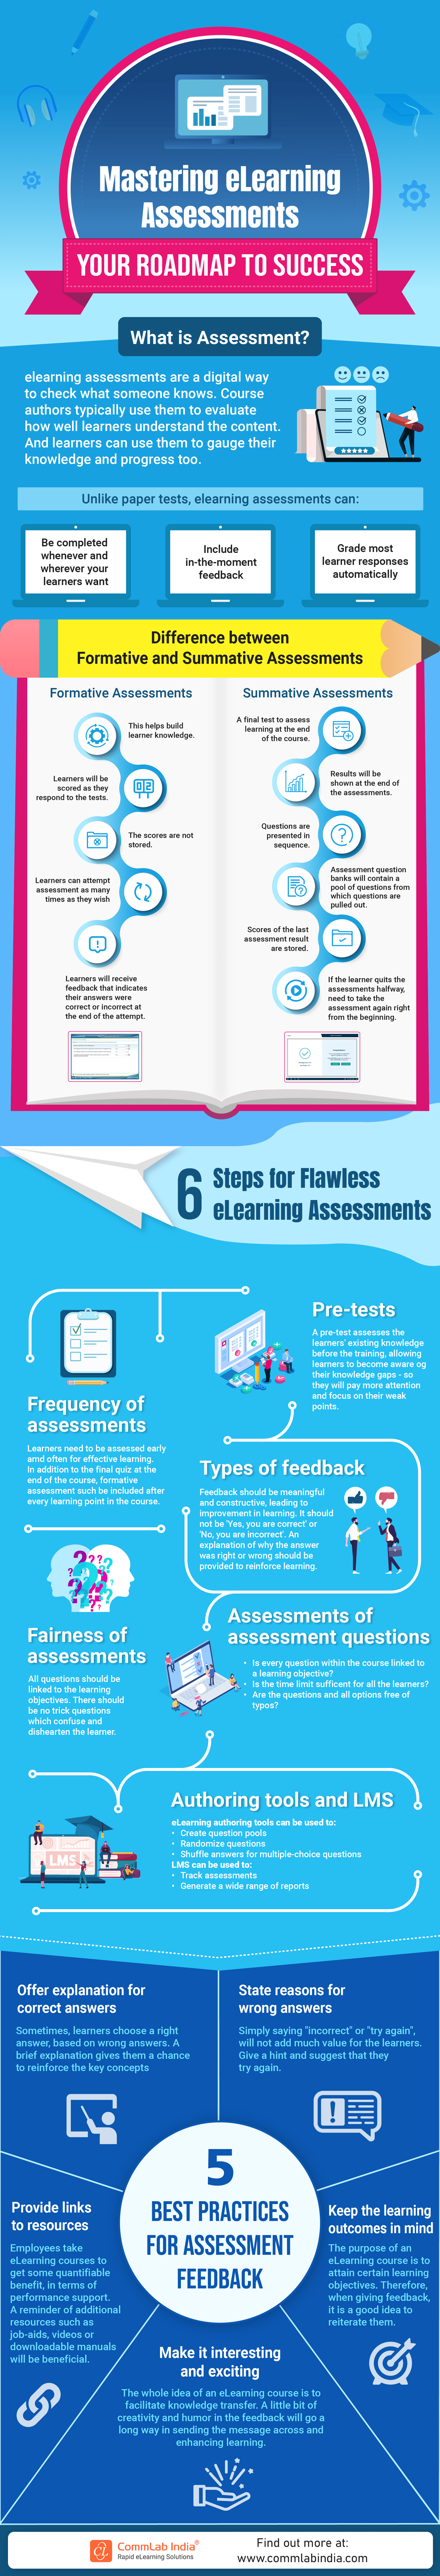 eLearning Assessments – Enhancing eLearning With the Power of Assessments